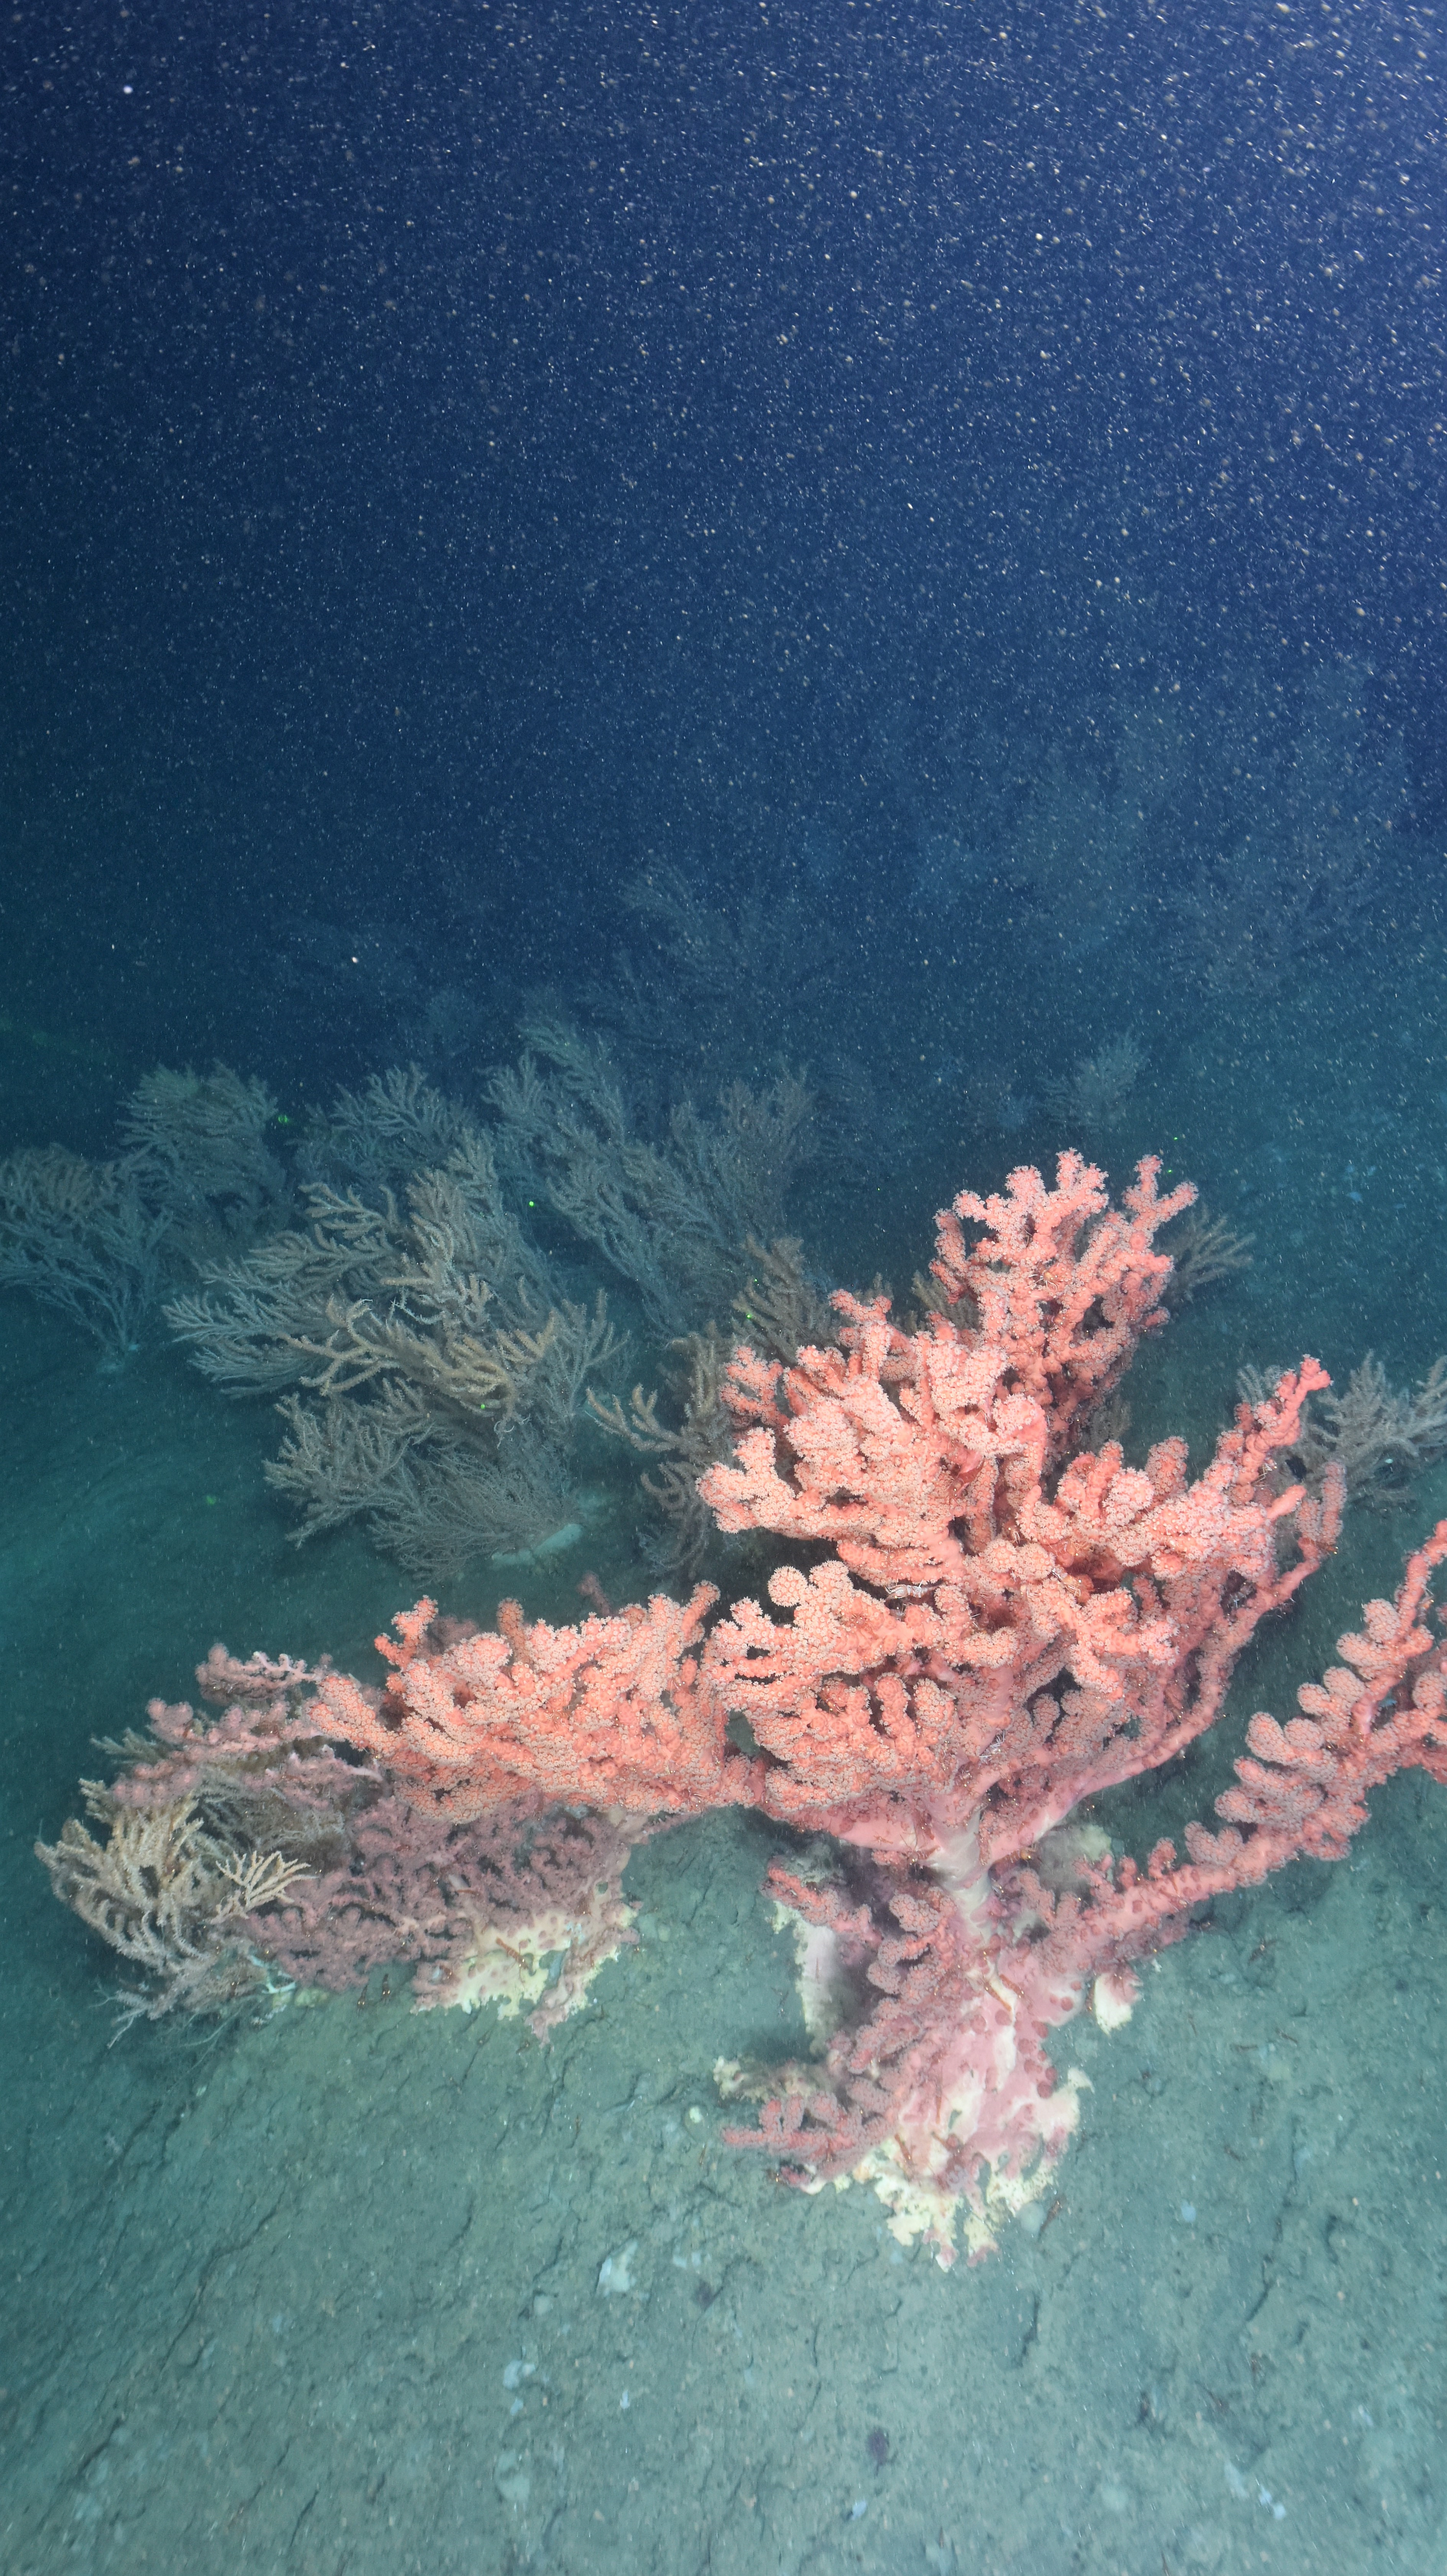 A pink-coloured cold-water coral is seen on the ocean floor in the foreground, with many others in the background.